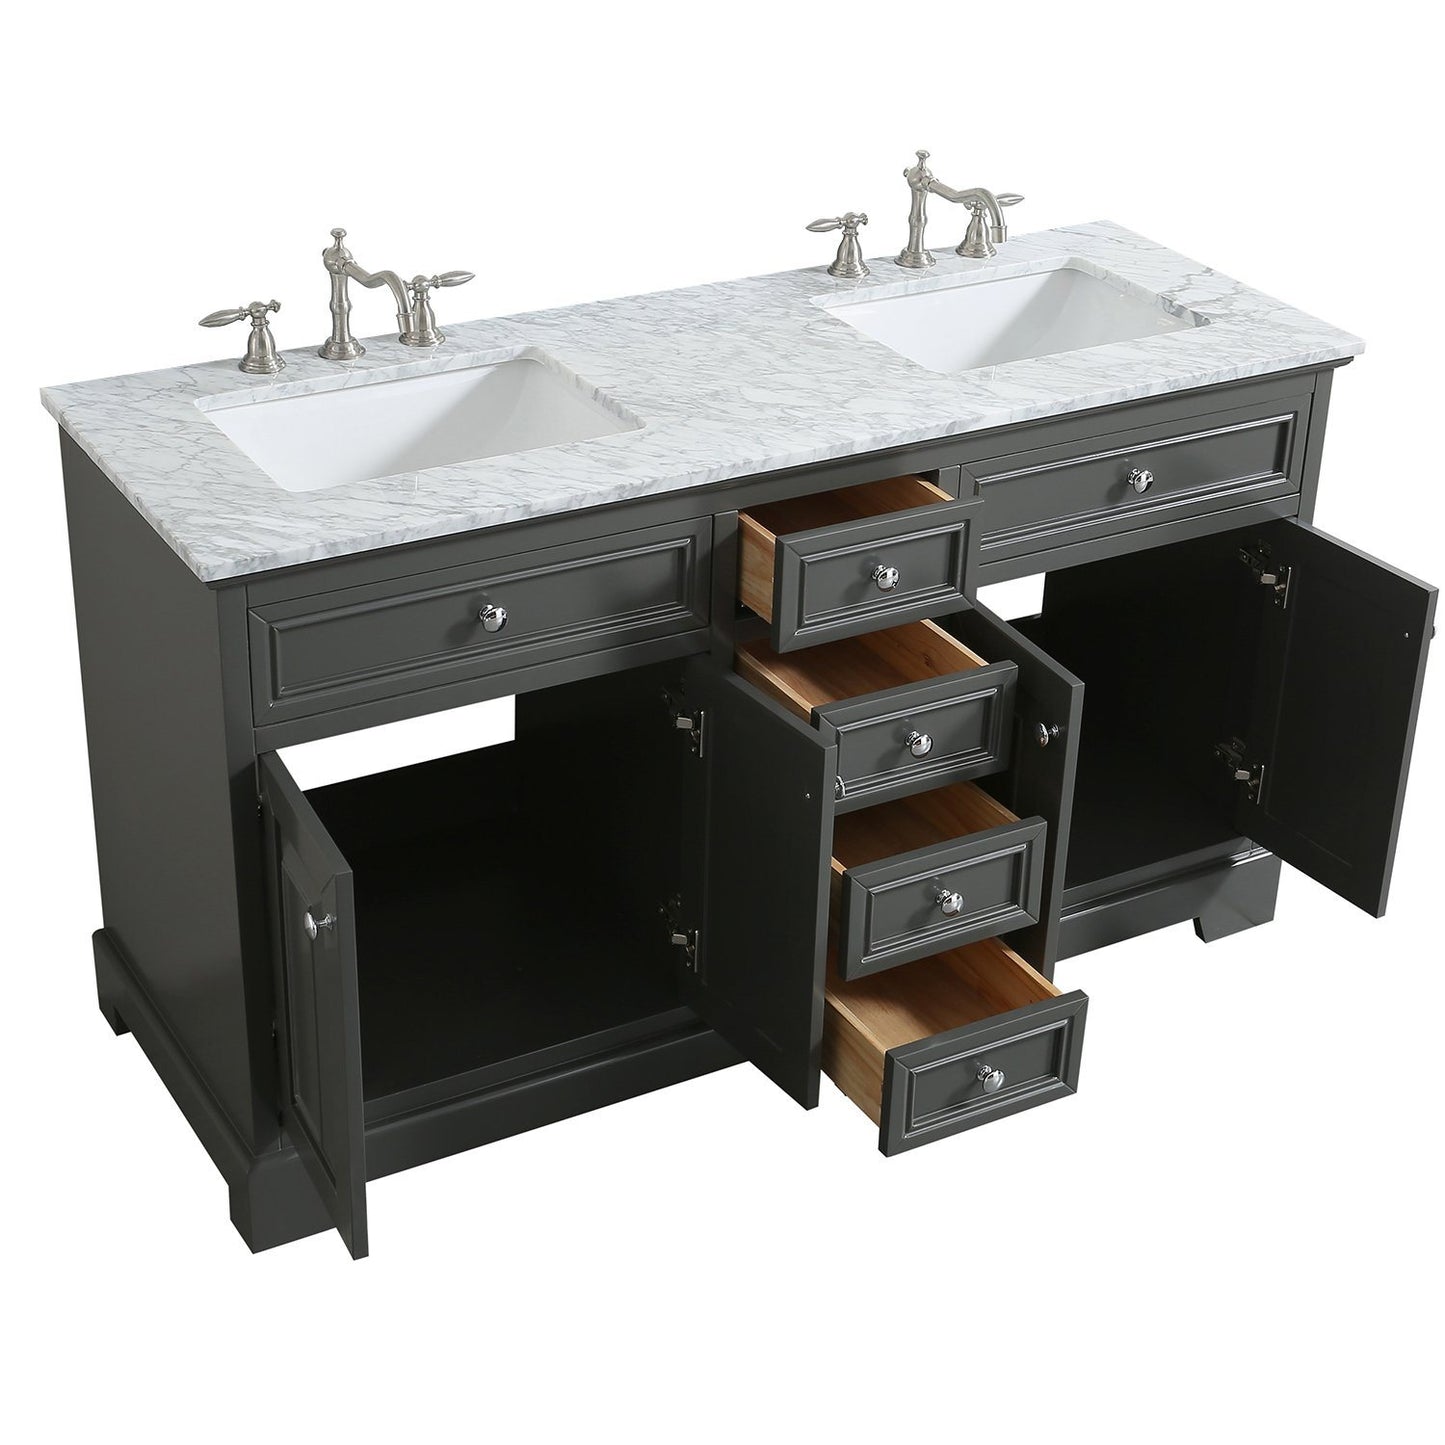 Eviva Monroe 60 in Double Bathroom Vanity  with White Carrara Marble Top and White Undermount Porcelain Sinks - Luxe Bathroom Vanities Luxury Bathroom Fixtures Bathroom Furniture